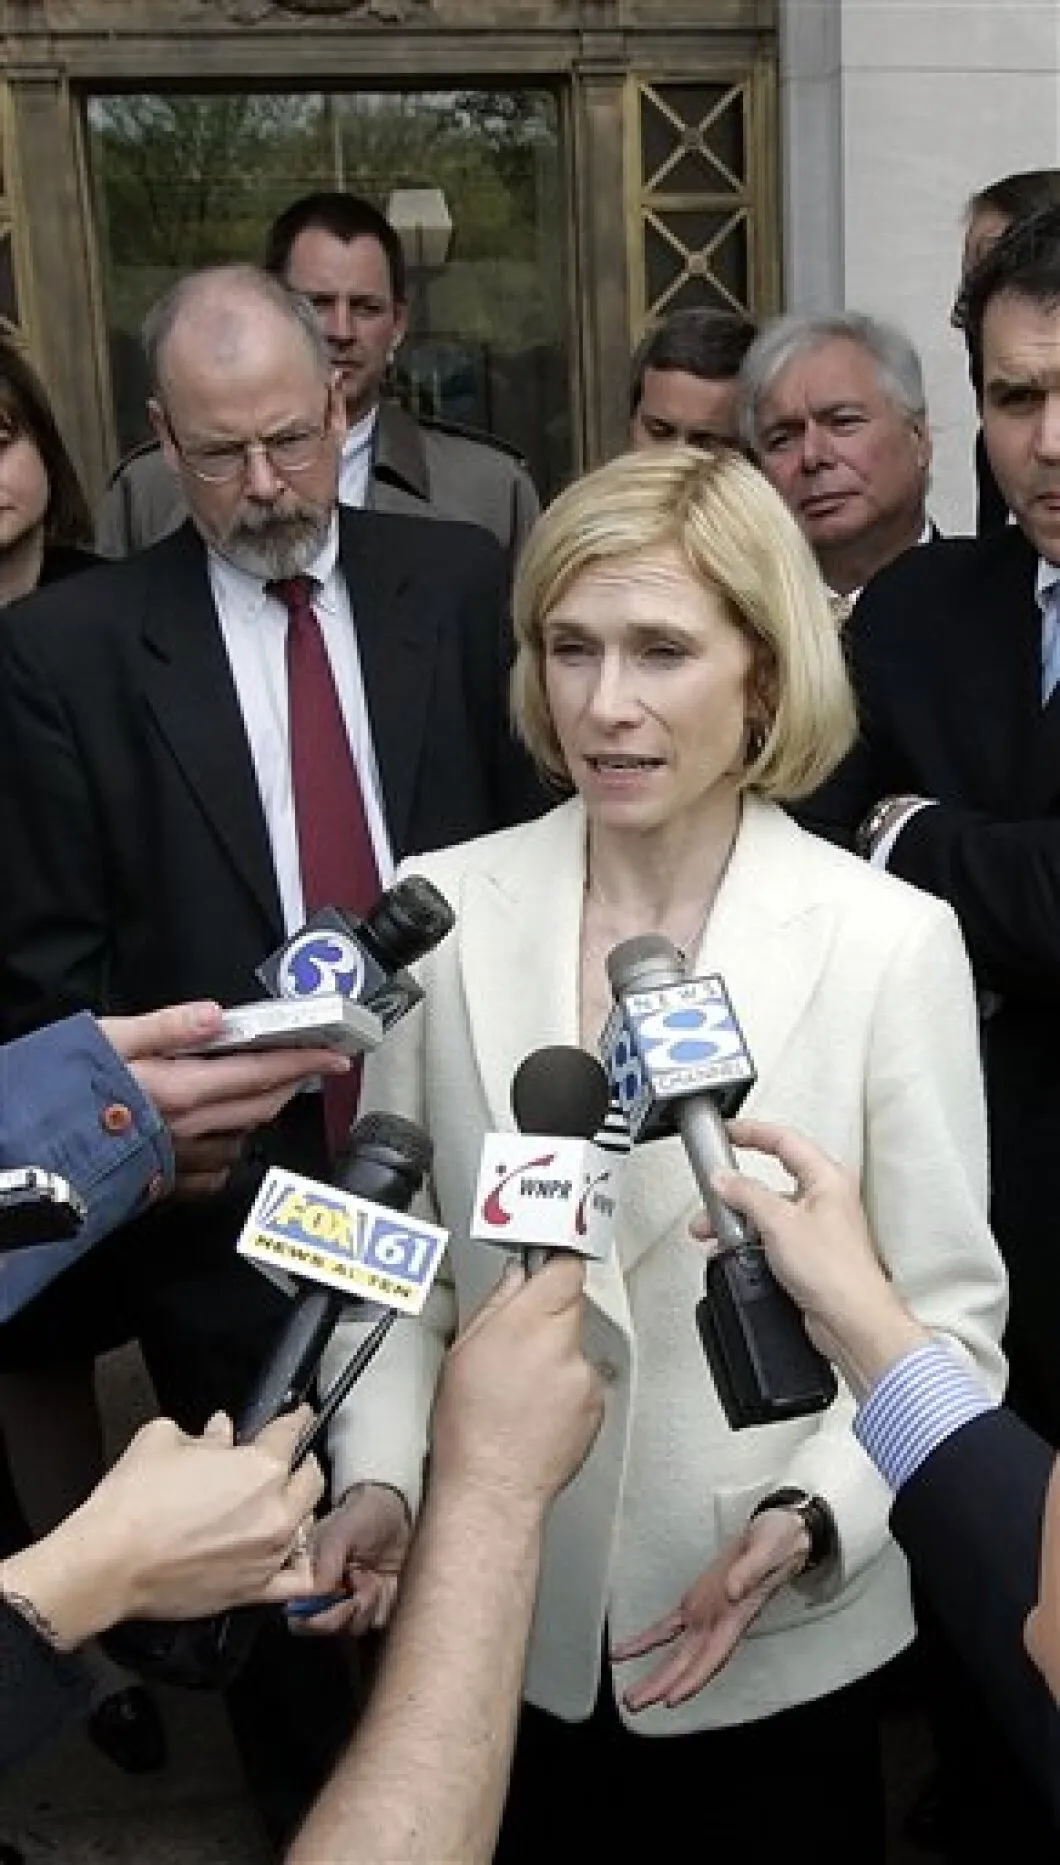 Nora Dannehy has overcome one hurdle on her way to an appointment as an associate justice to Connecticut’s State Supreme Court.